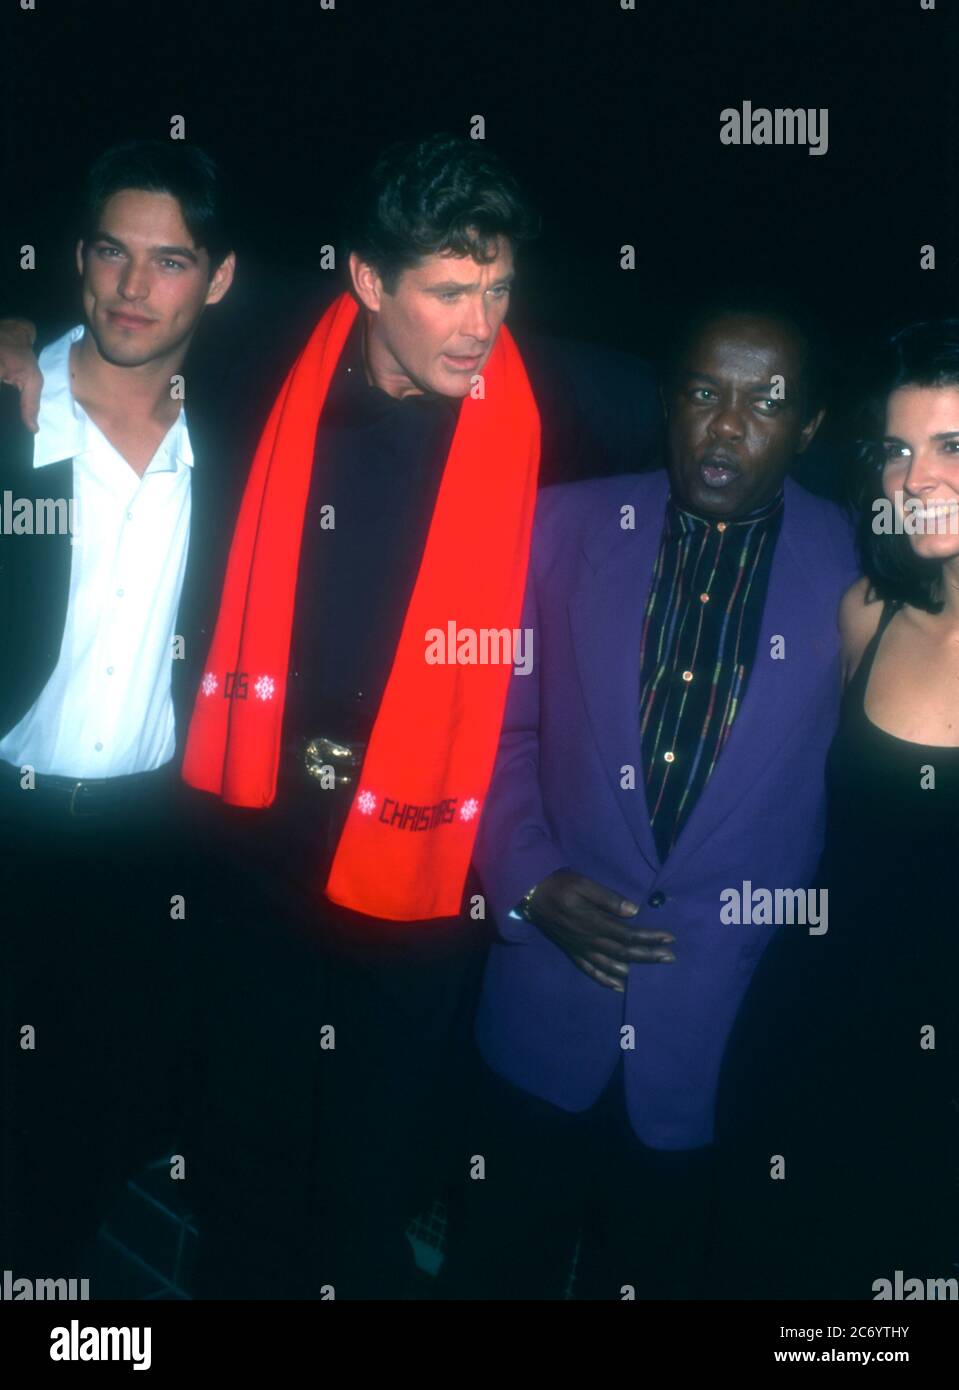 Universal City, California, USA 15th December 1995 (L-R) Actor Eddie Cibrian, actor David Hasselhoff, singer Lou Rawls and actress Angie Harmon attend Baywatch & Baywatch Nights Holiday Party on December 15, 1995 at B.B. King's Blues Club in Universal City, California, USA. Photo by Barry King/Alamy Stock Photo Stock Photo